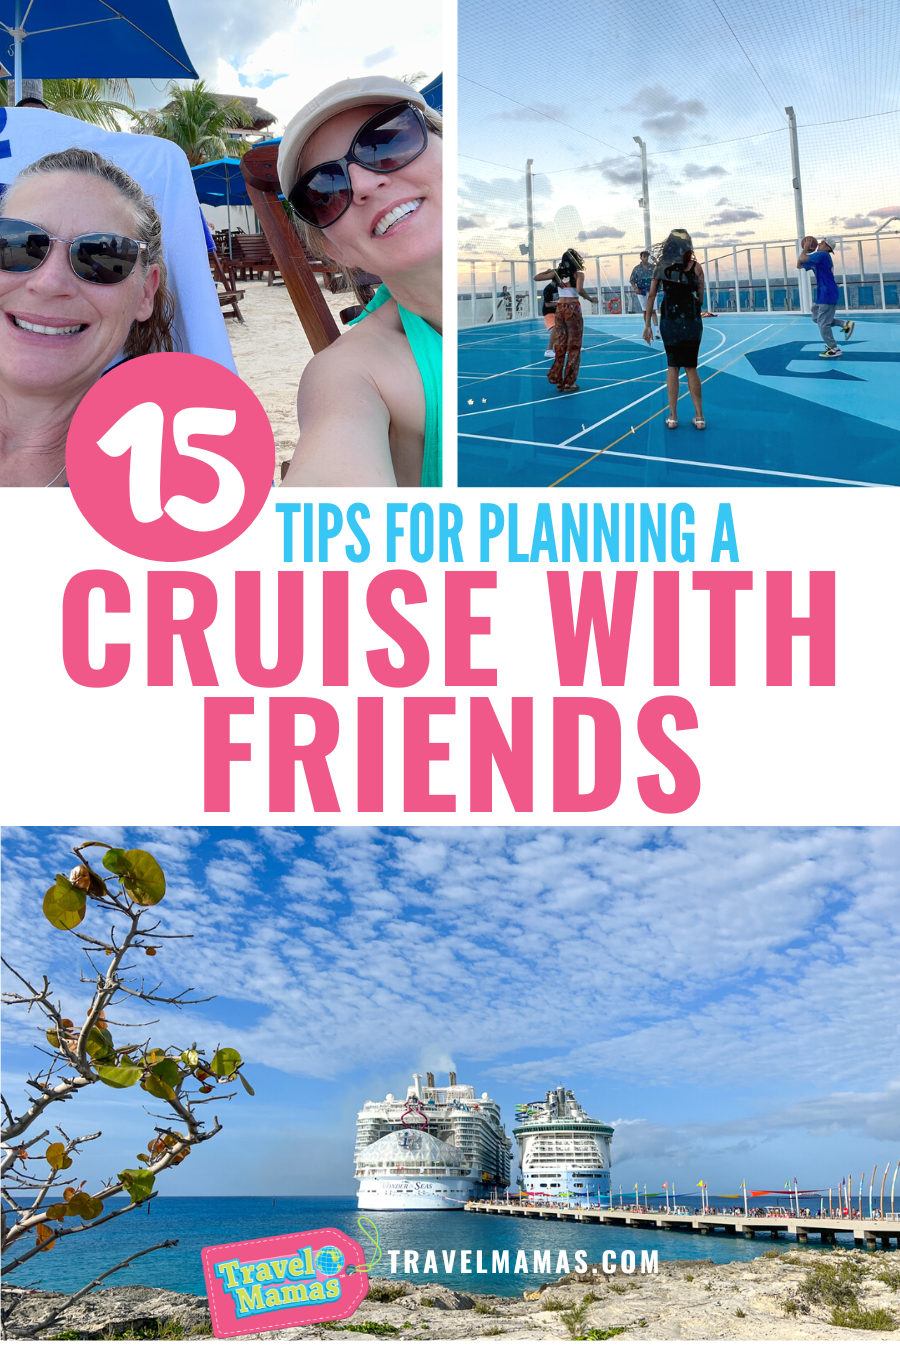 How to Plan a Cruise with Friends